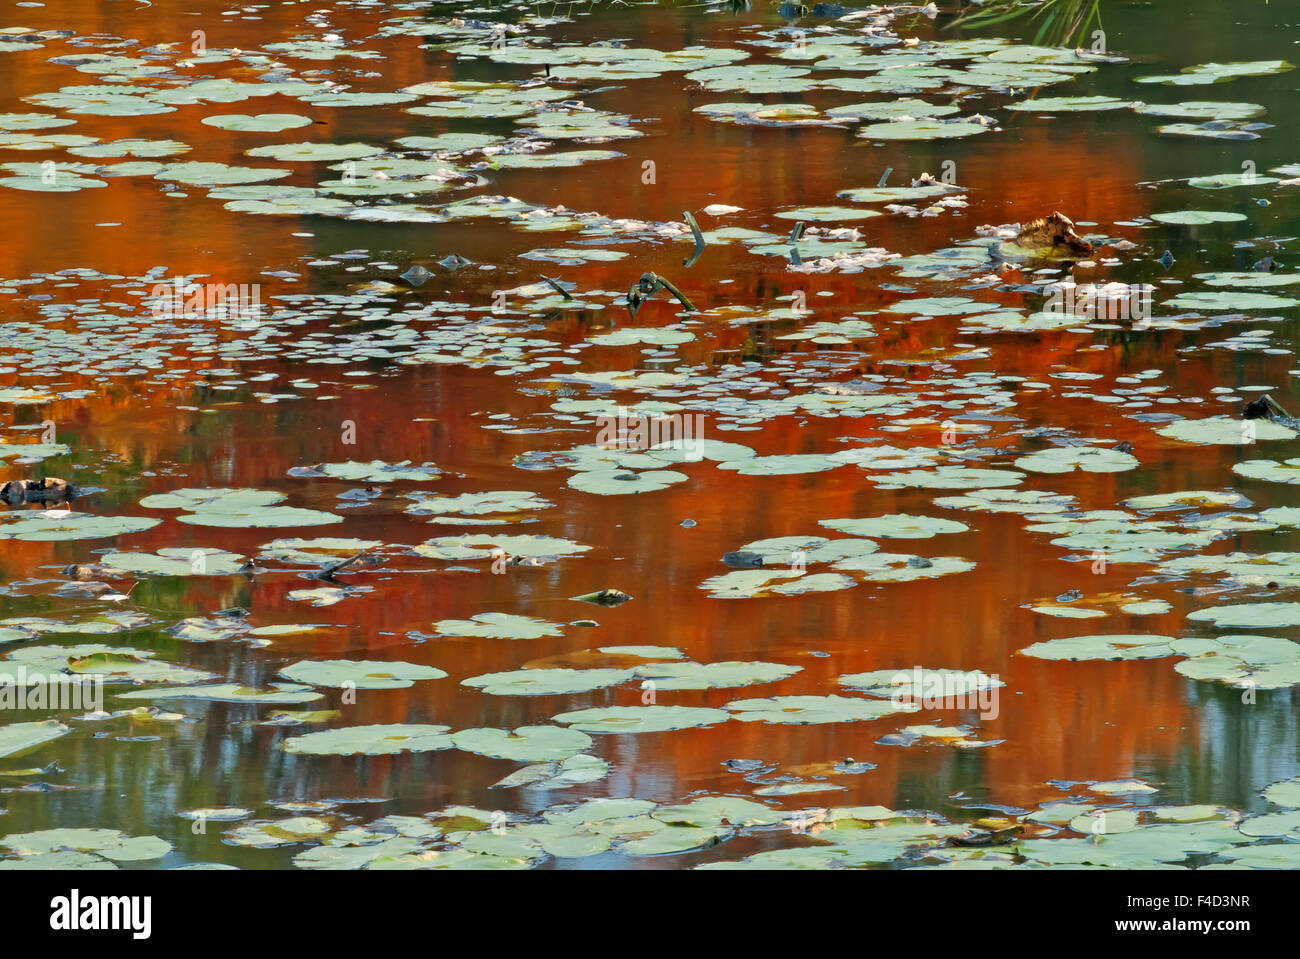 Canada, Ontario, Killbear Provincial Park. Water lilies in autumn-colored pond. Credit as: Mike Grandmaison / Jaynes Gallery / DanitaDelimont.com Stock Photo